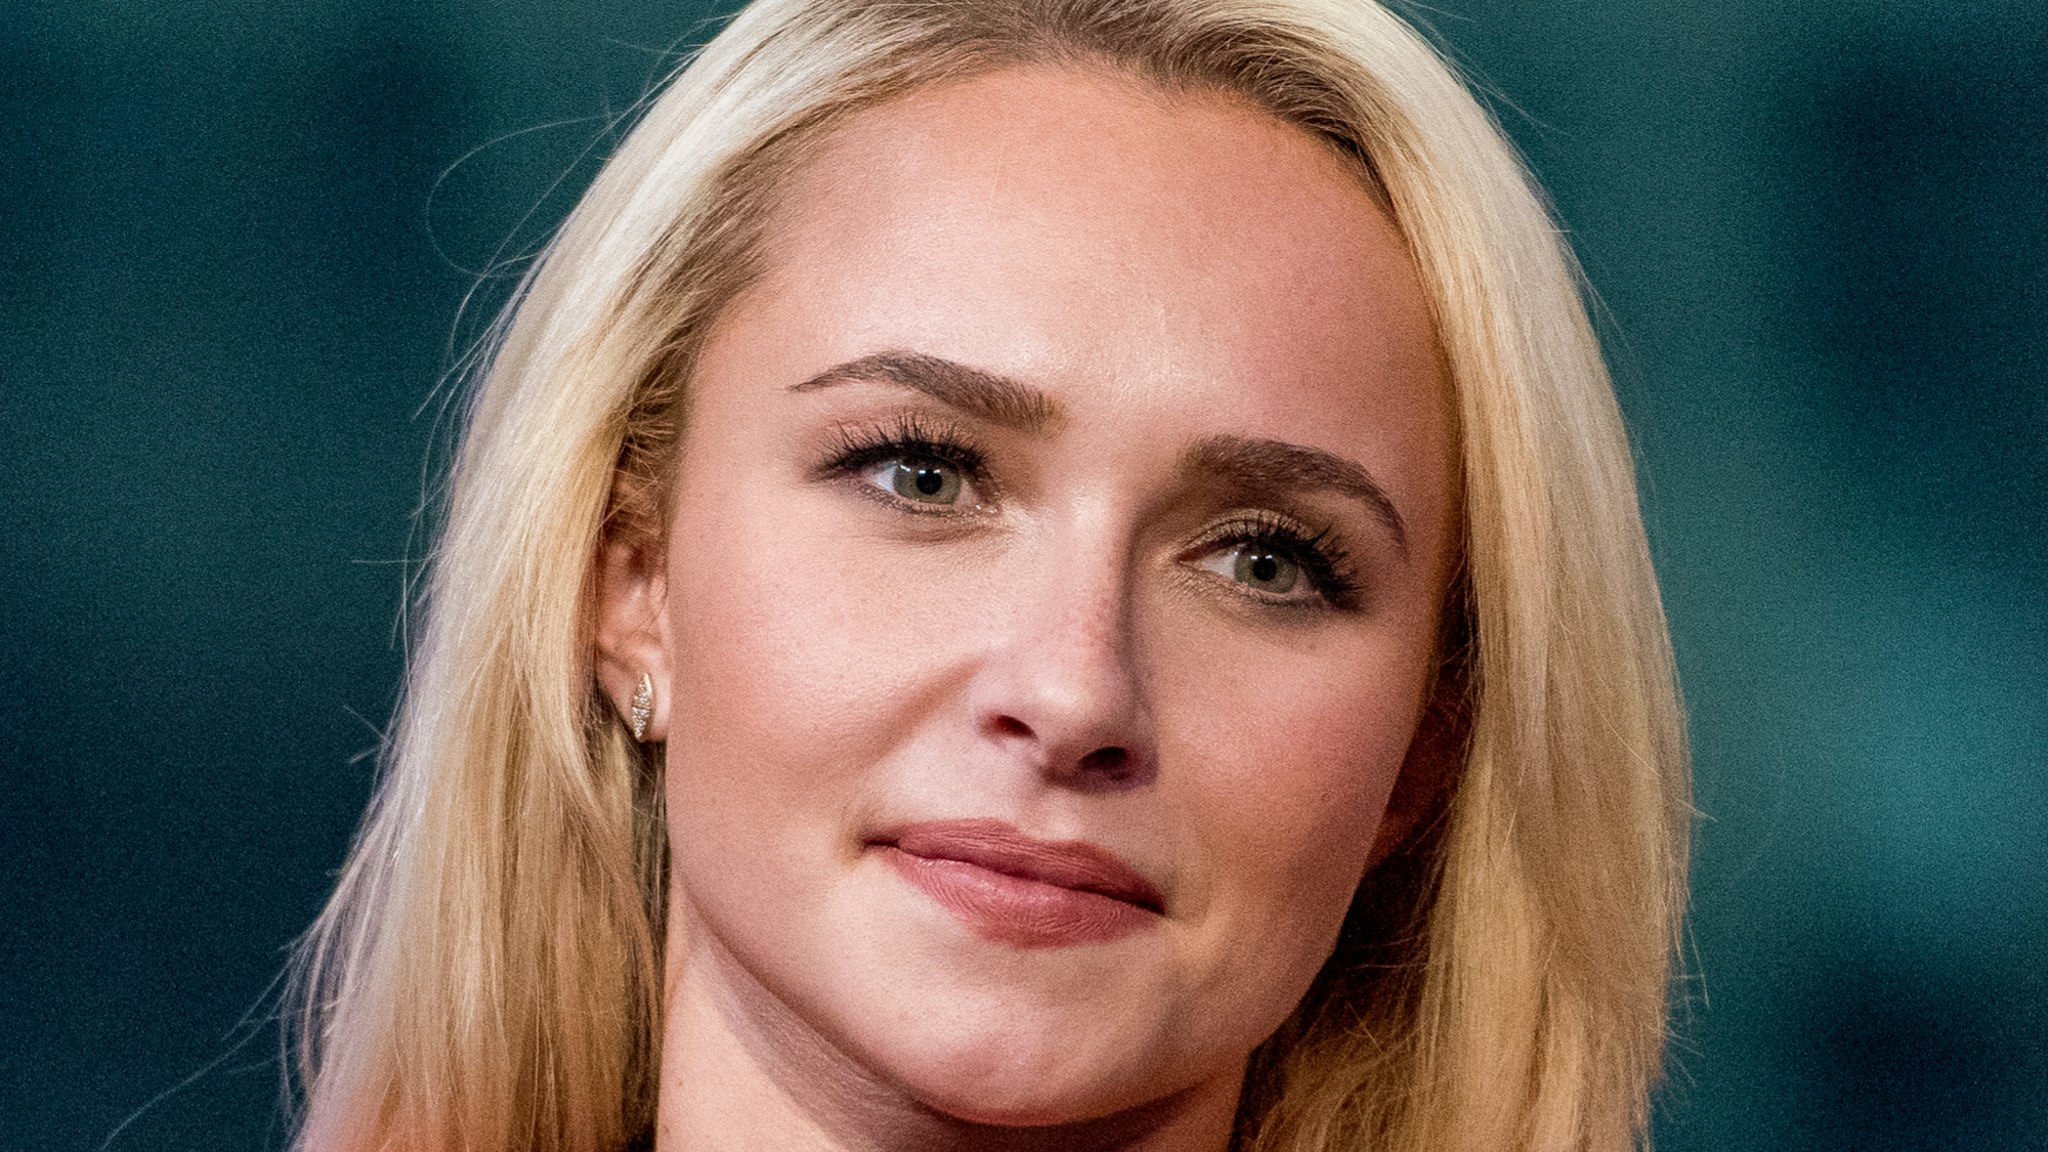 Hayden Panettiere discusses "Nashville" with the Build Series at AOL HQ on January 5, 2017 in New York City.